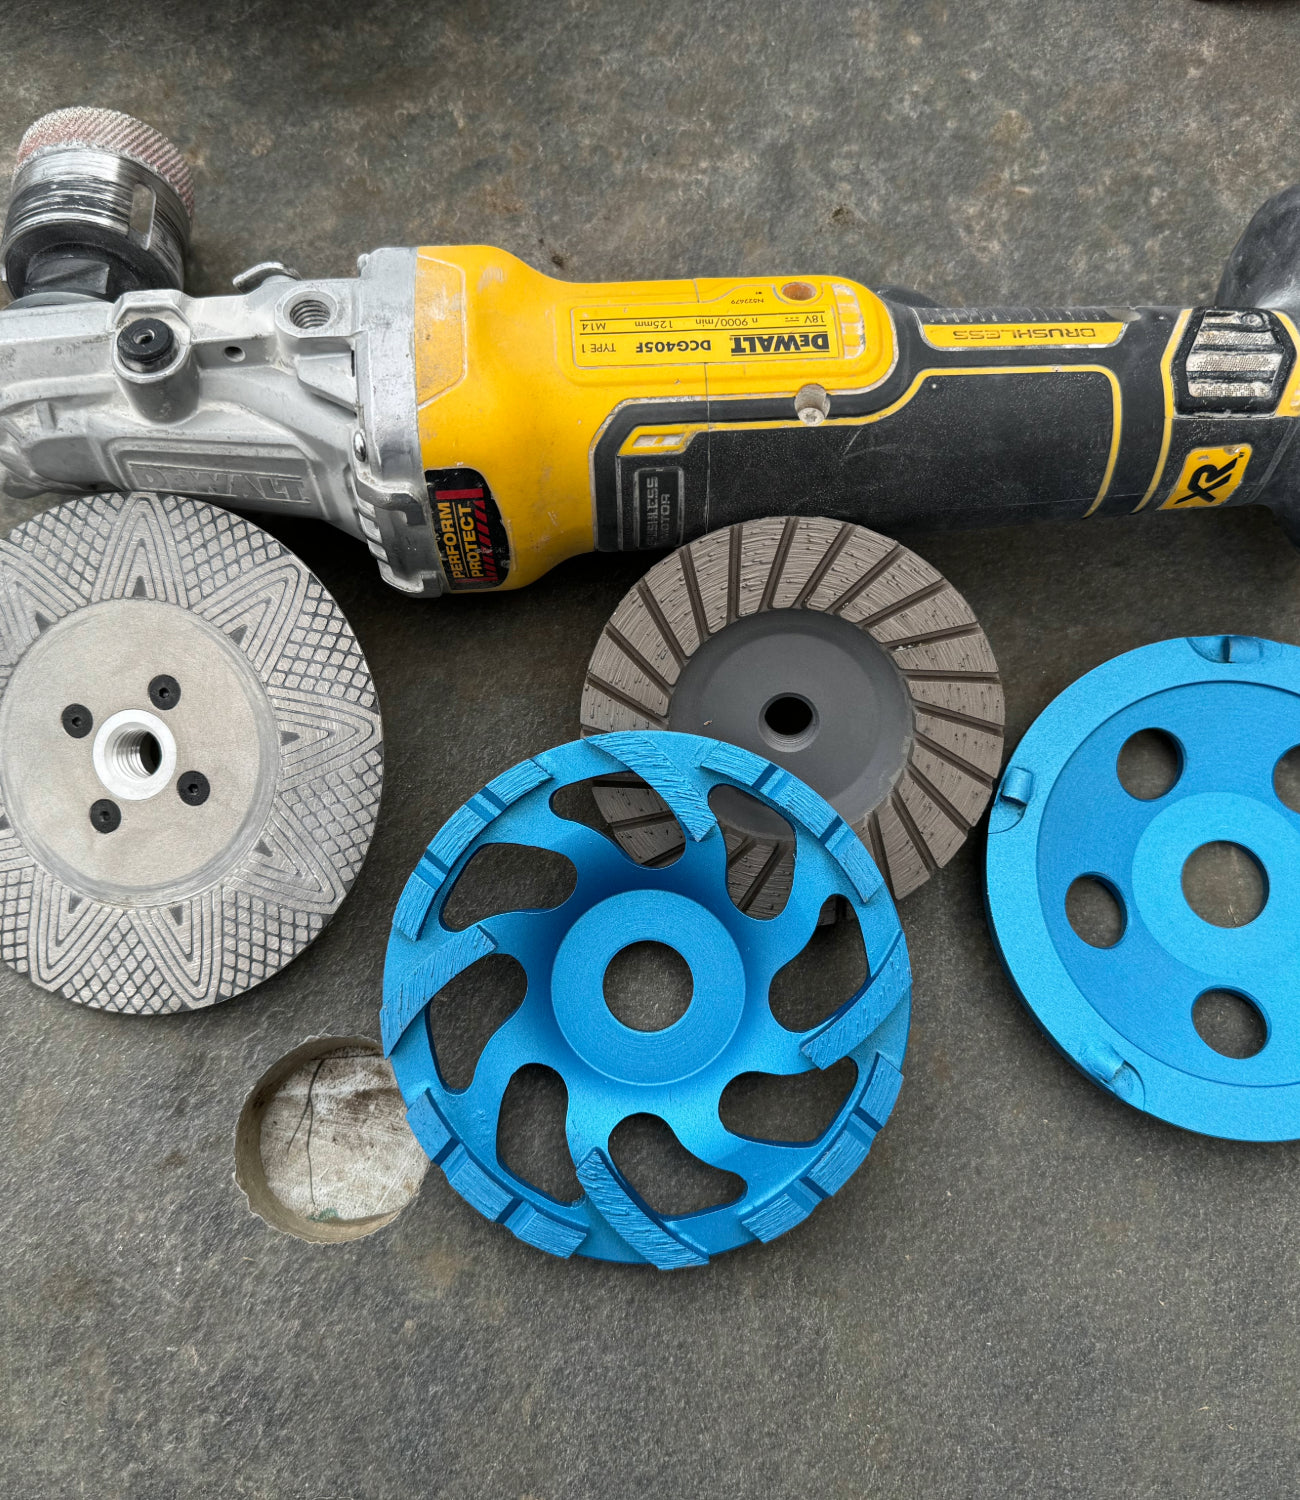 "Assortment of high-performance grinding blades displayed on a tile, showcasing various sizes and designs for different cutting and grinding applications.